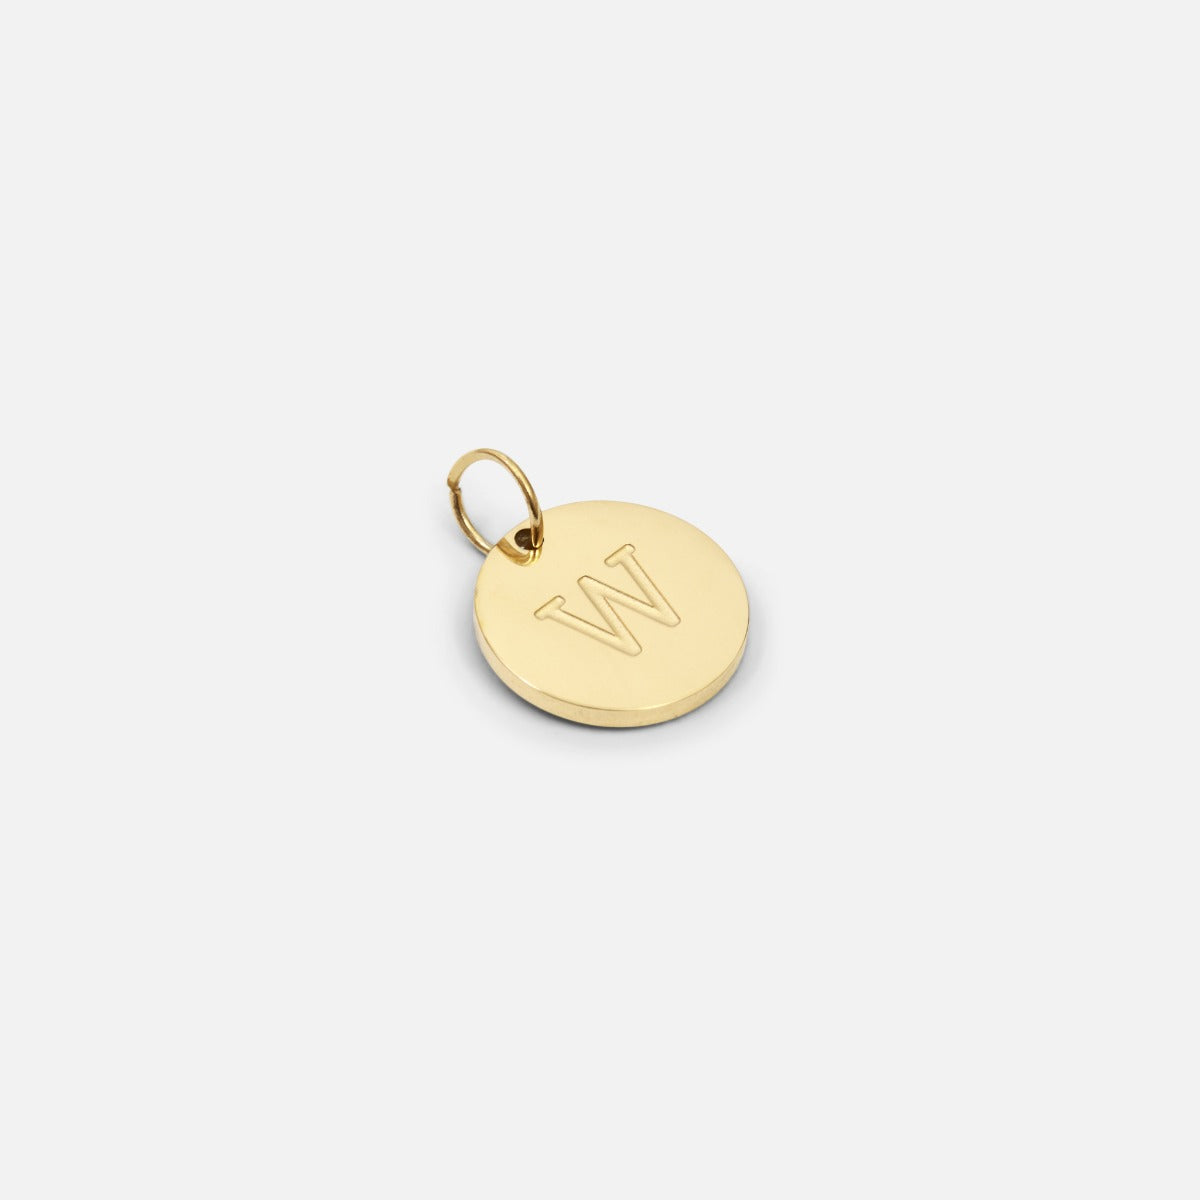 Small symbolic golden charm engraved with the letter of the alphabet "w"